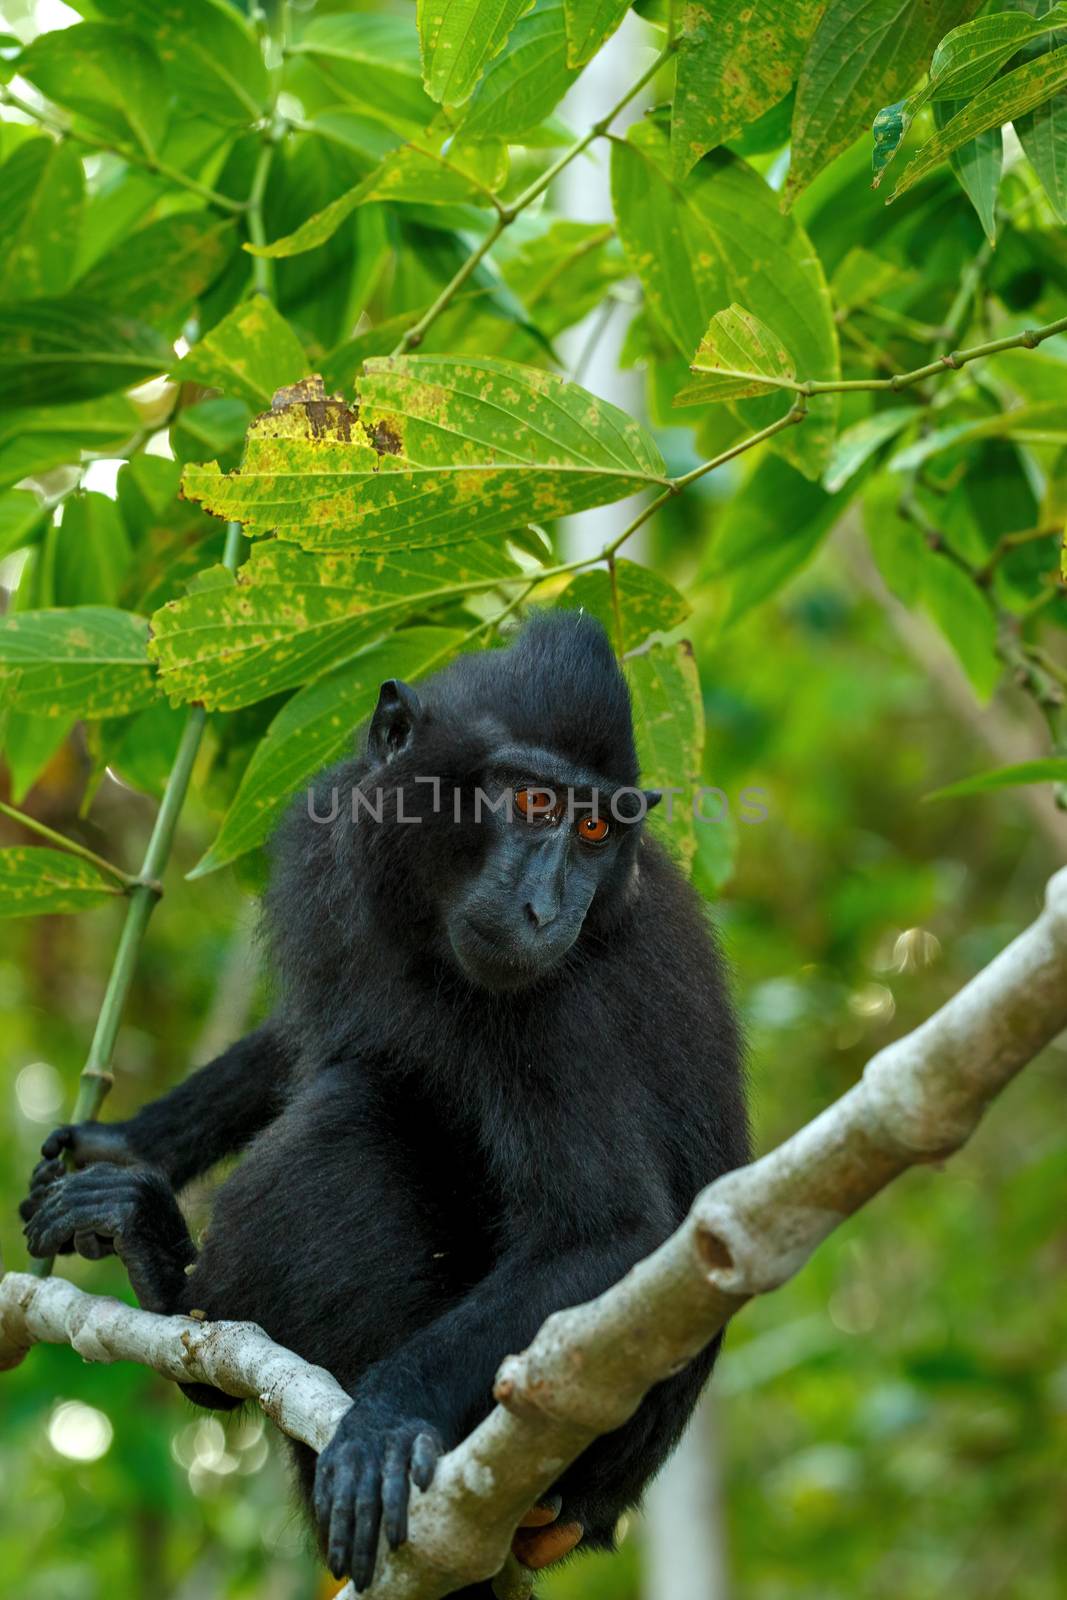 Celebes crested macaque, Sulawesi, Indonesia wildlife by artush